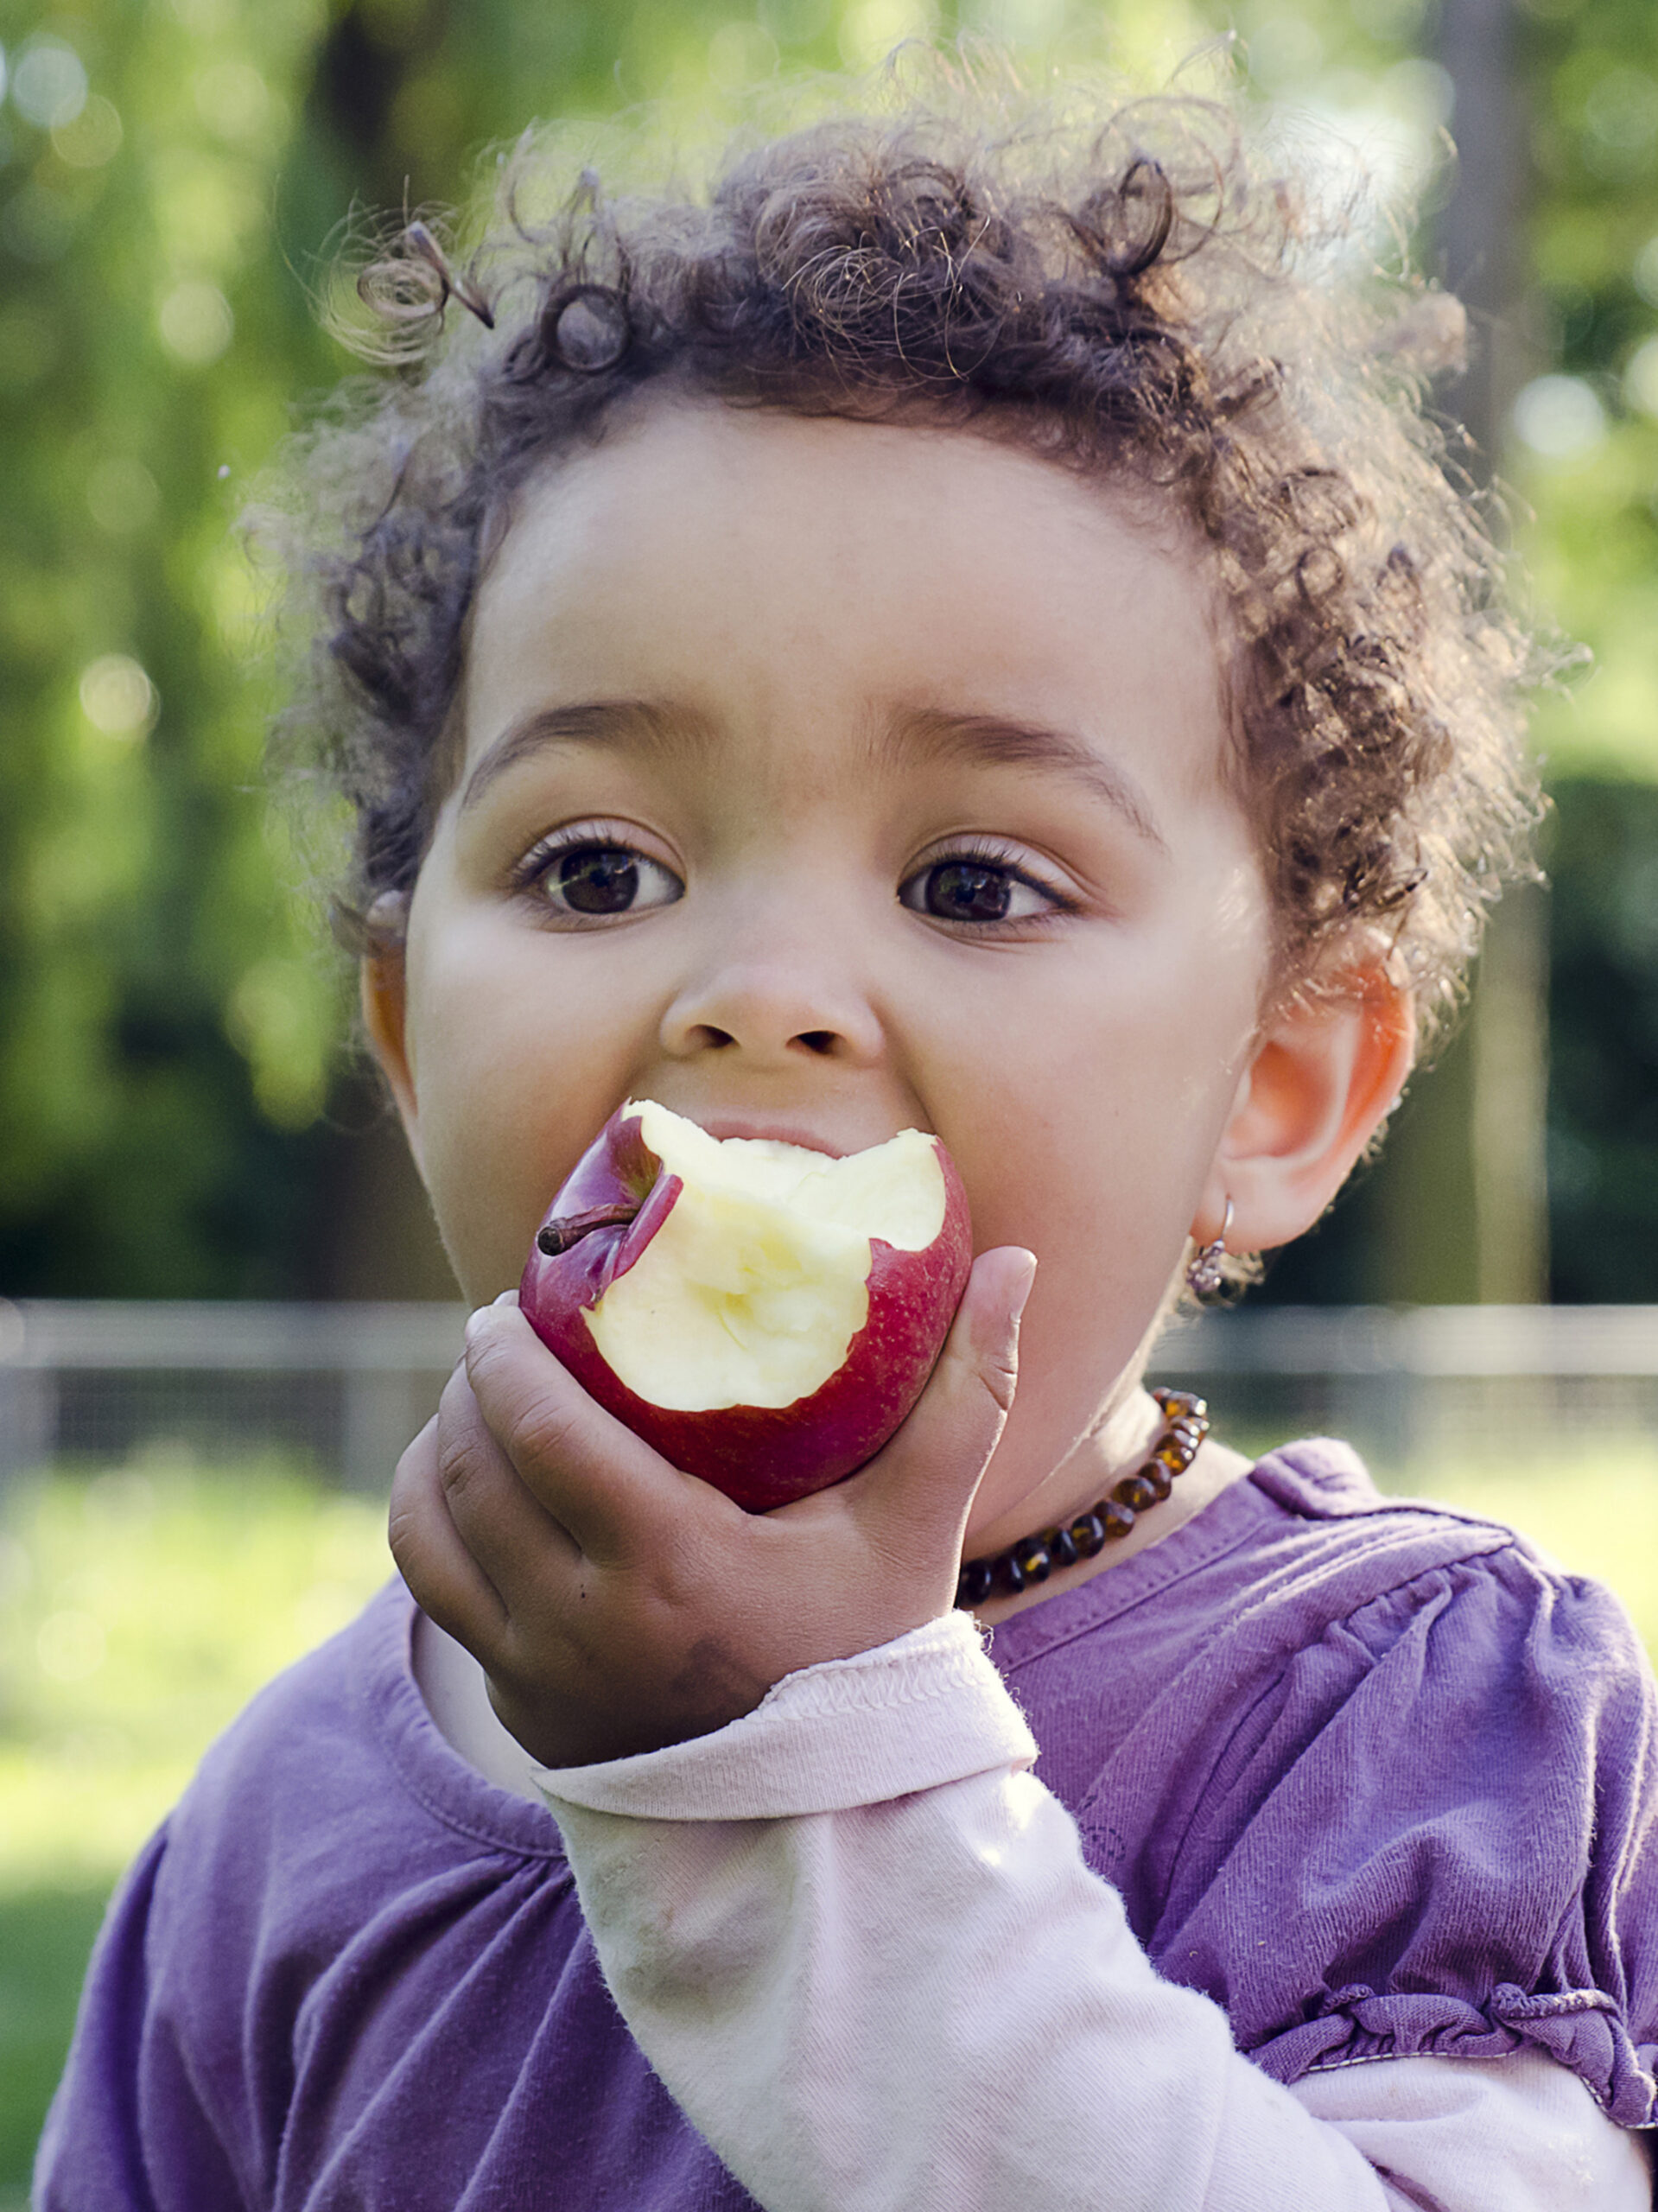 Young girl eating apple - healthy snack ideas for kids from CHOC dietitians